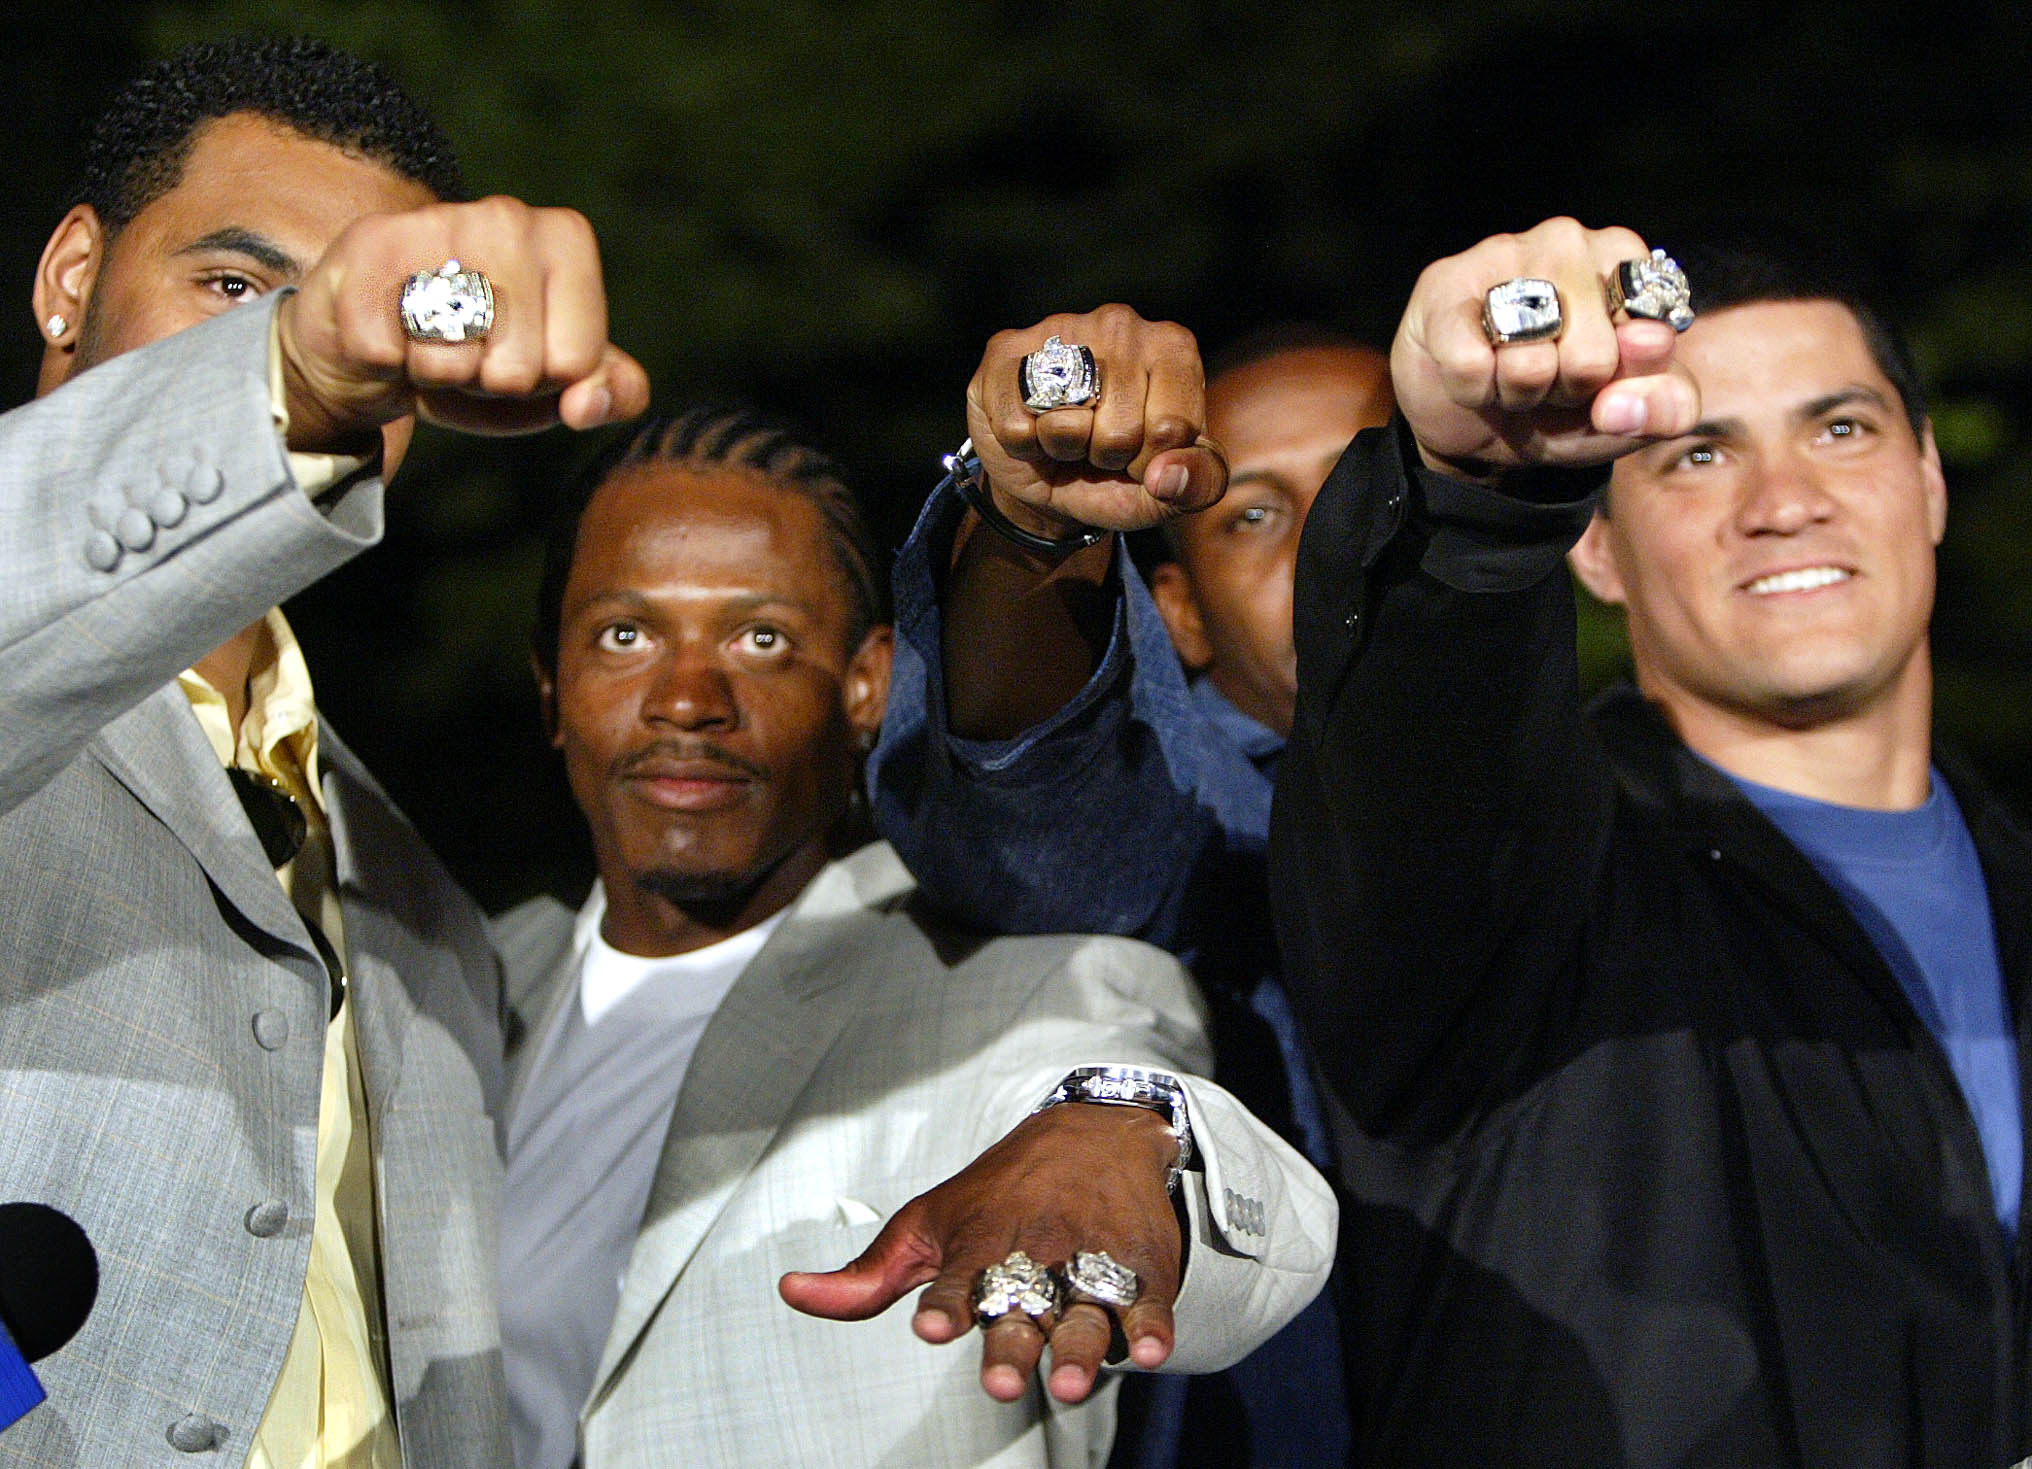 A former New England Patriots star allegedly had his Super Bowl rings stolen by his son.